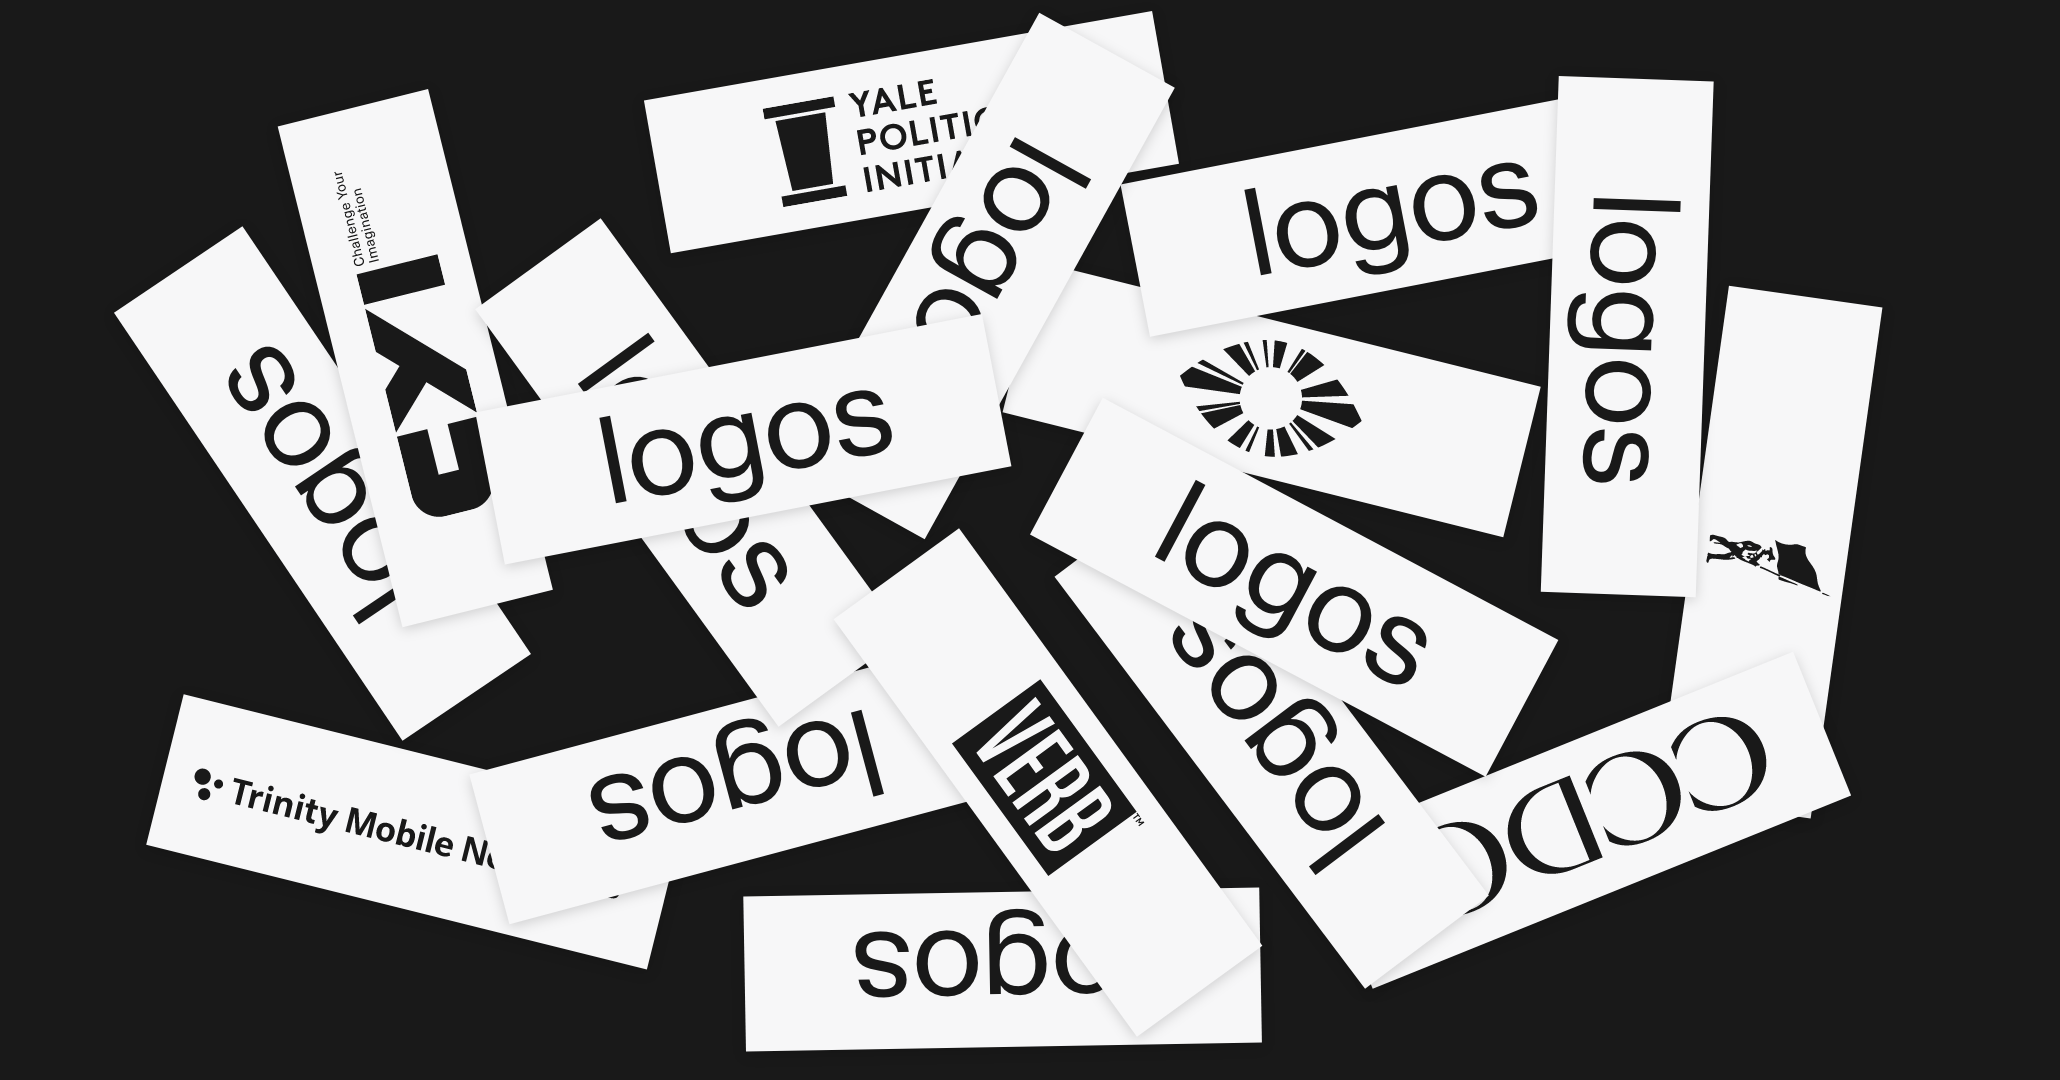 Selected logos by Isaac Morrier: Verb, Challenge Your Imagination, Trinity Mobile Networks, and more